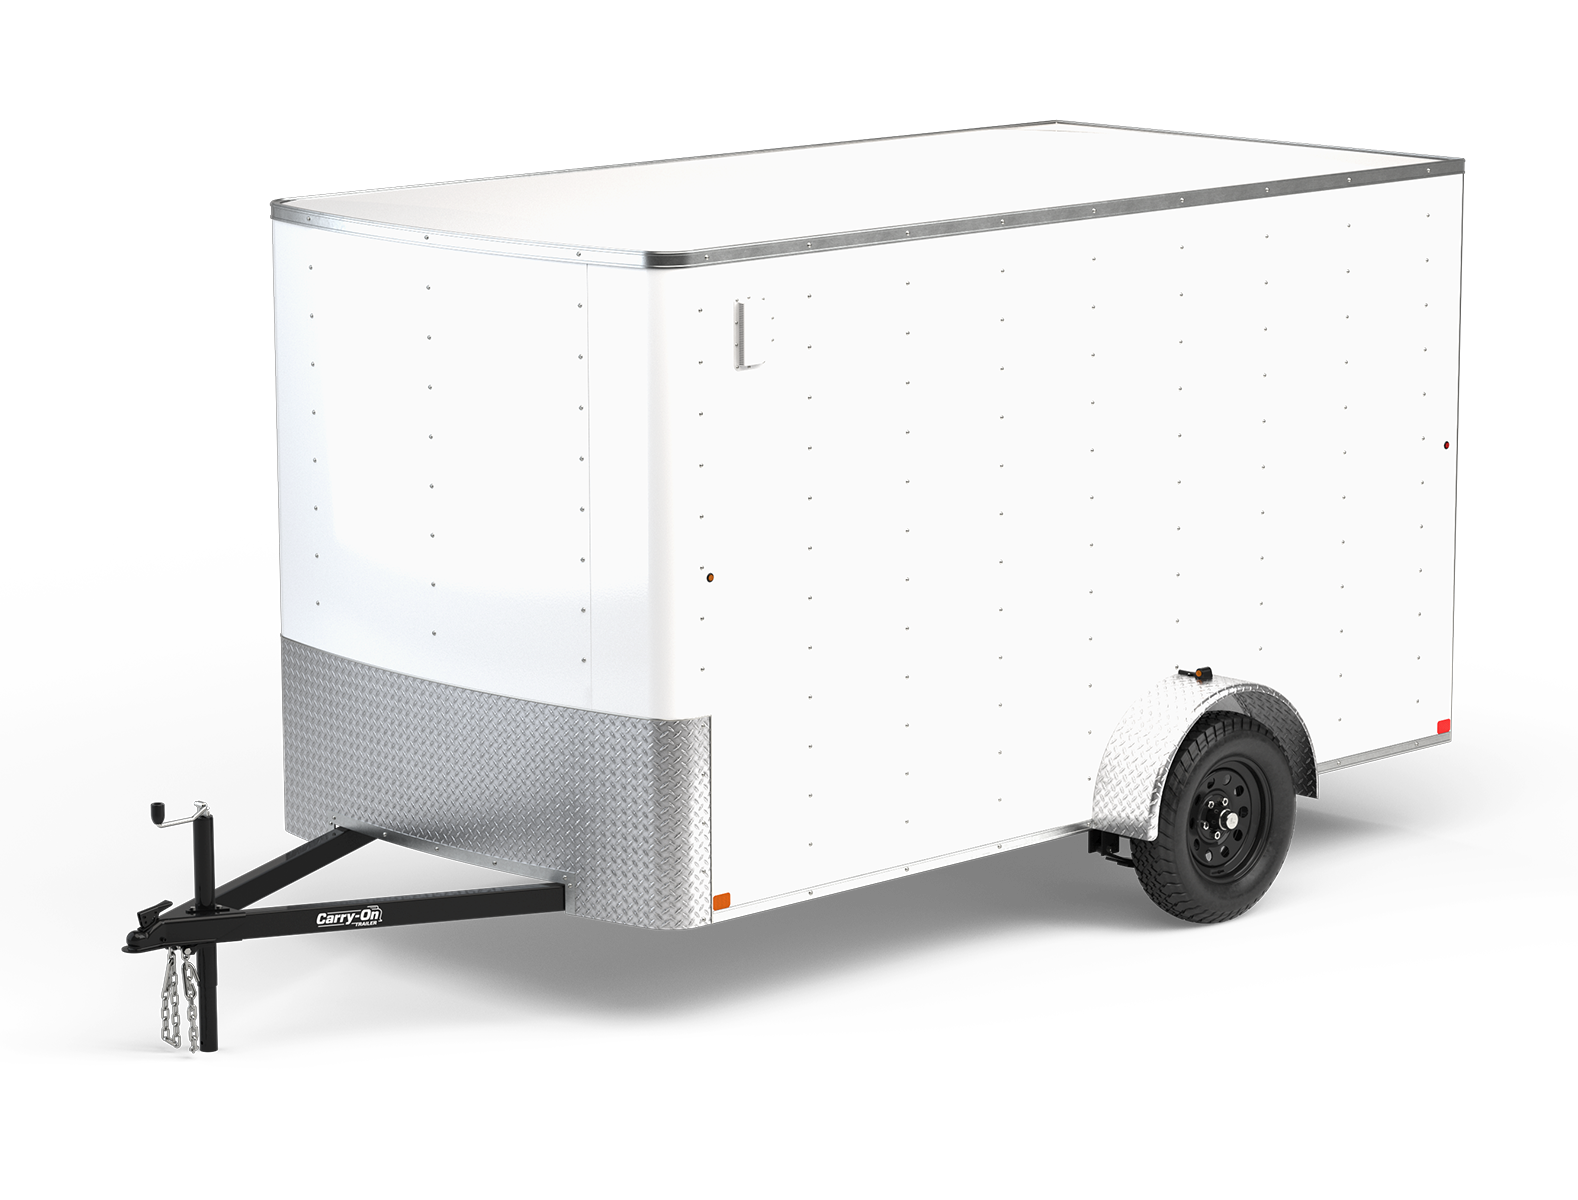 trailer front view